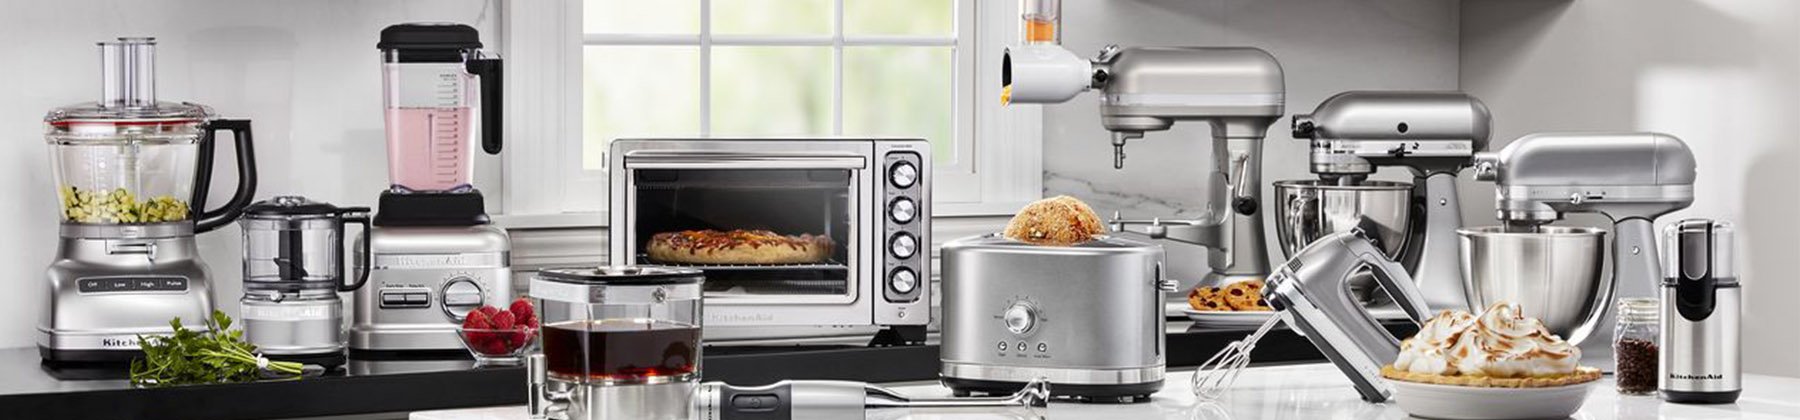 Photo KitchenAid silver product line-up including food processor, blender, convection oven, toaster, cold brew coffeemaker, hand mixer, stand mixers, etc.